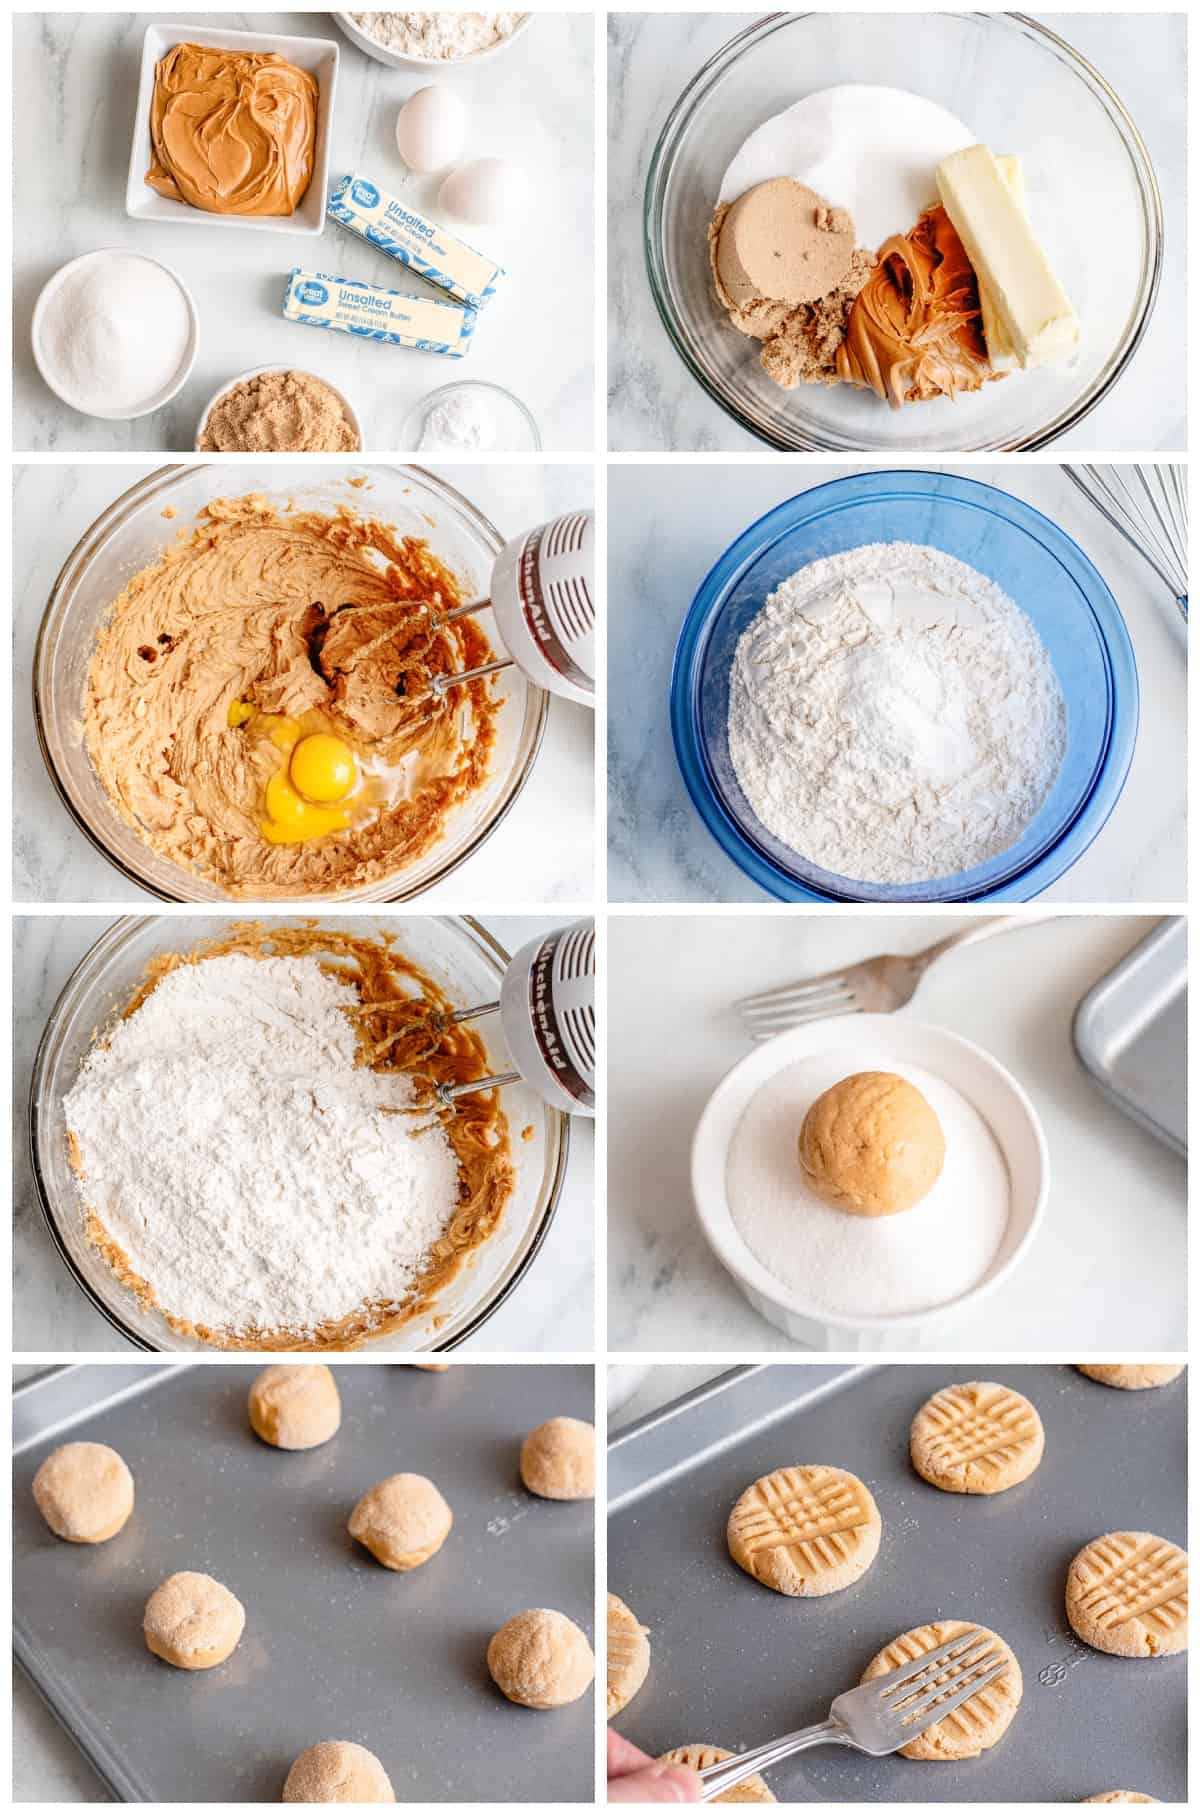 how to make peanut butter cookies step by step photo instructions